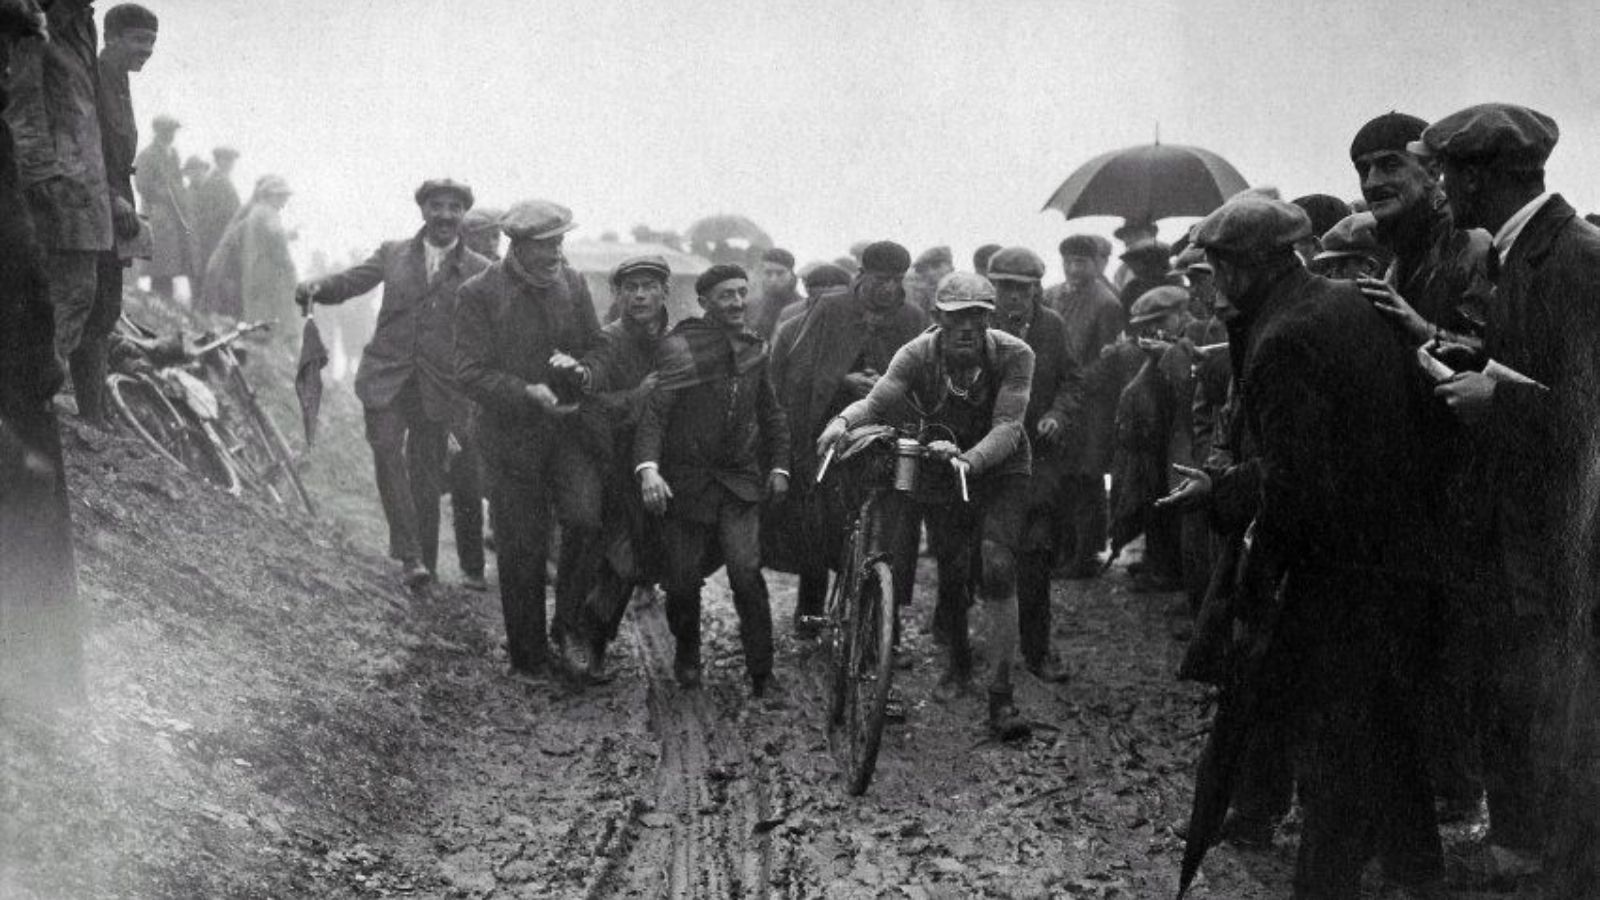 Lucien Buysse surronded by cycling fans on the harderst Tour de France stage ever ( 1926 Stage 20)